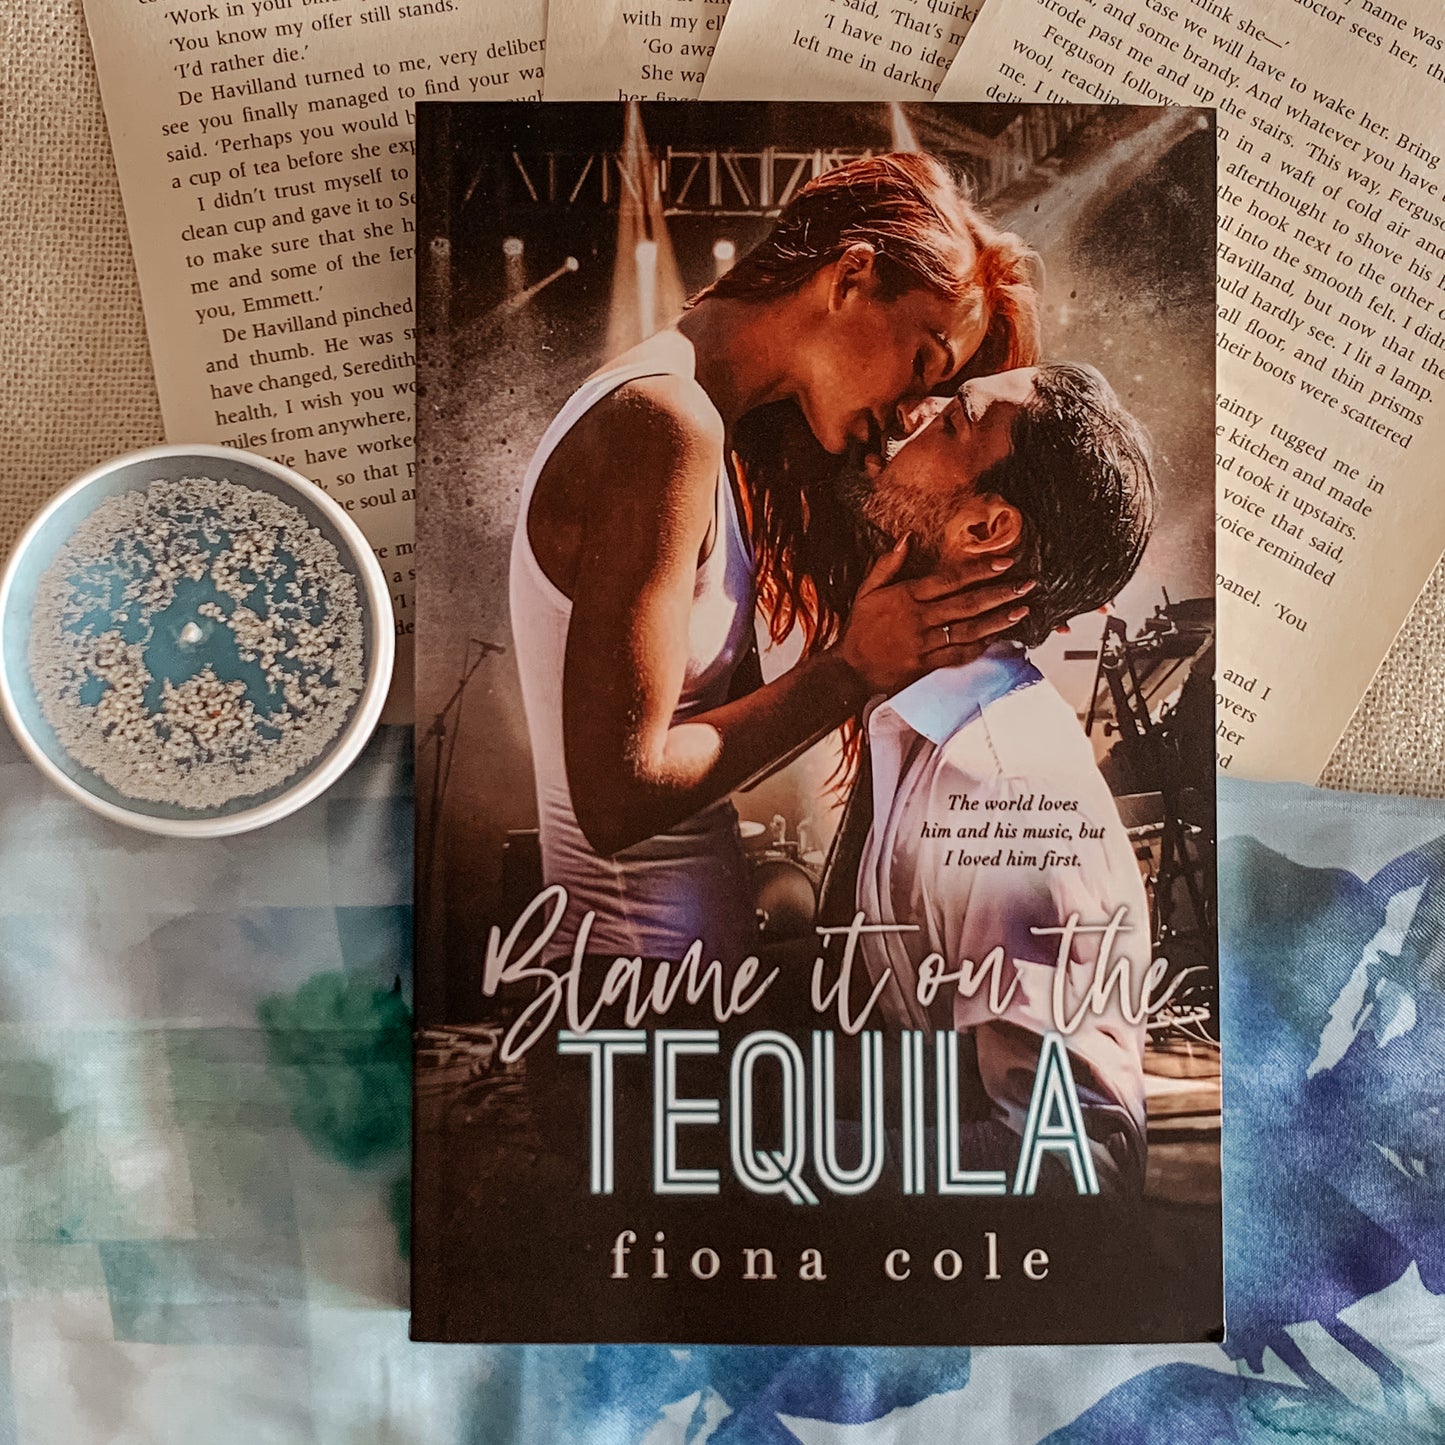 Blame it on the Tequila by Fiona Cole